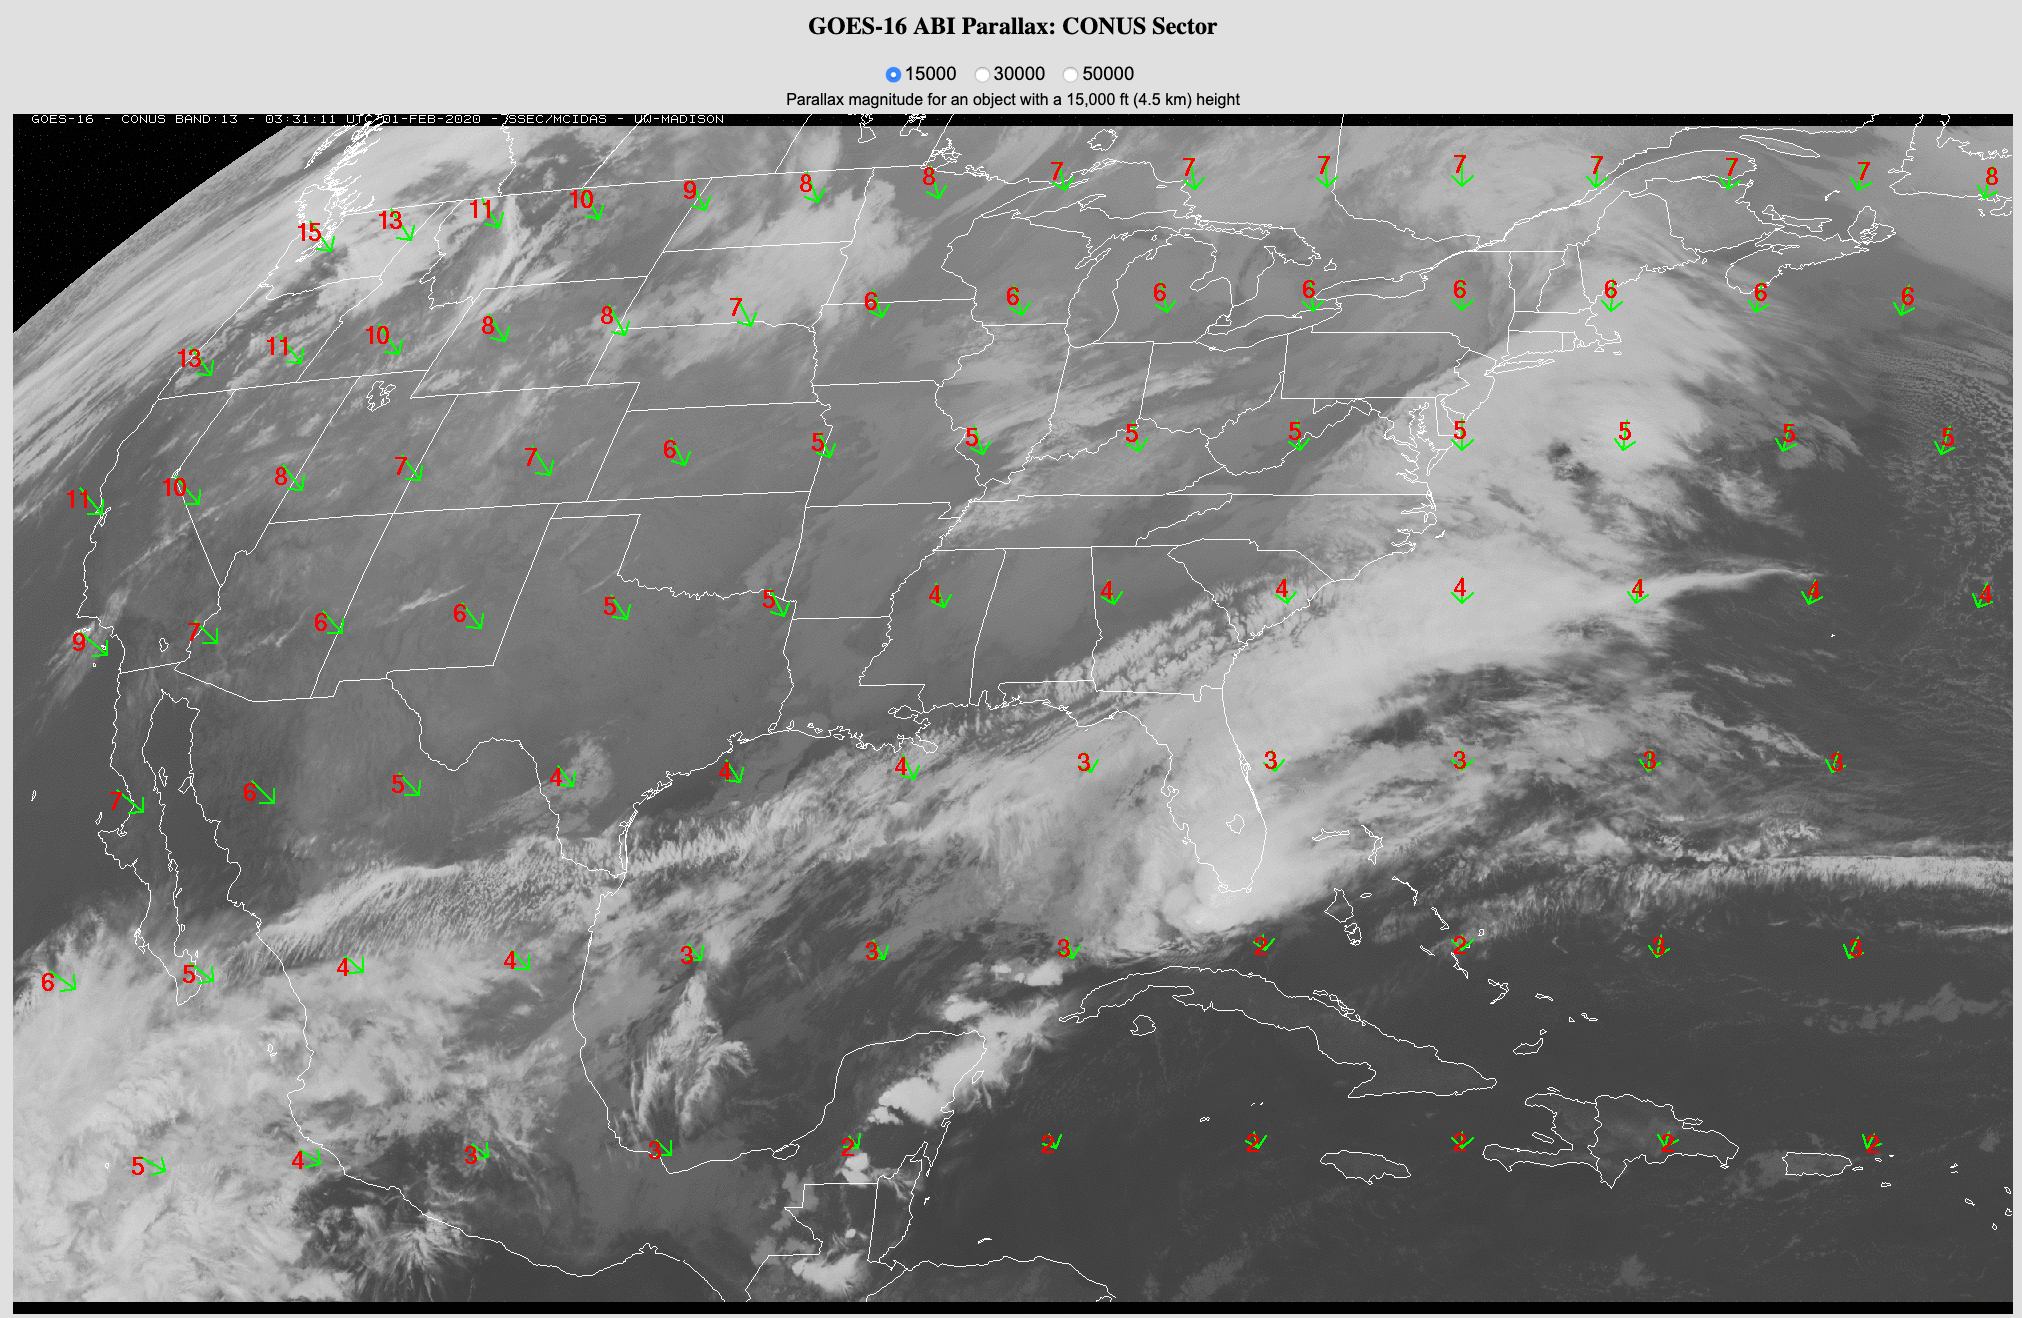 Parallax correct vectors (green arrows) and magnitudes (red. in km) for cloud features at 15,000 feet and 30,000 feet over the CONUS domain [click to enlarge]